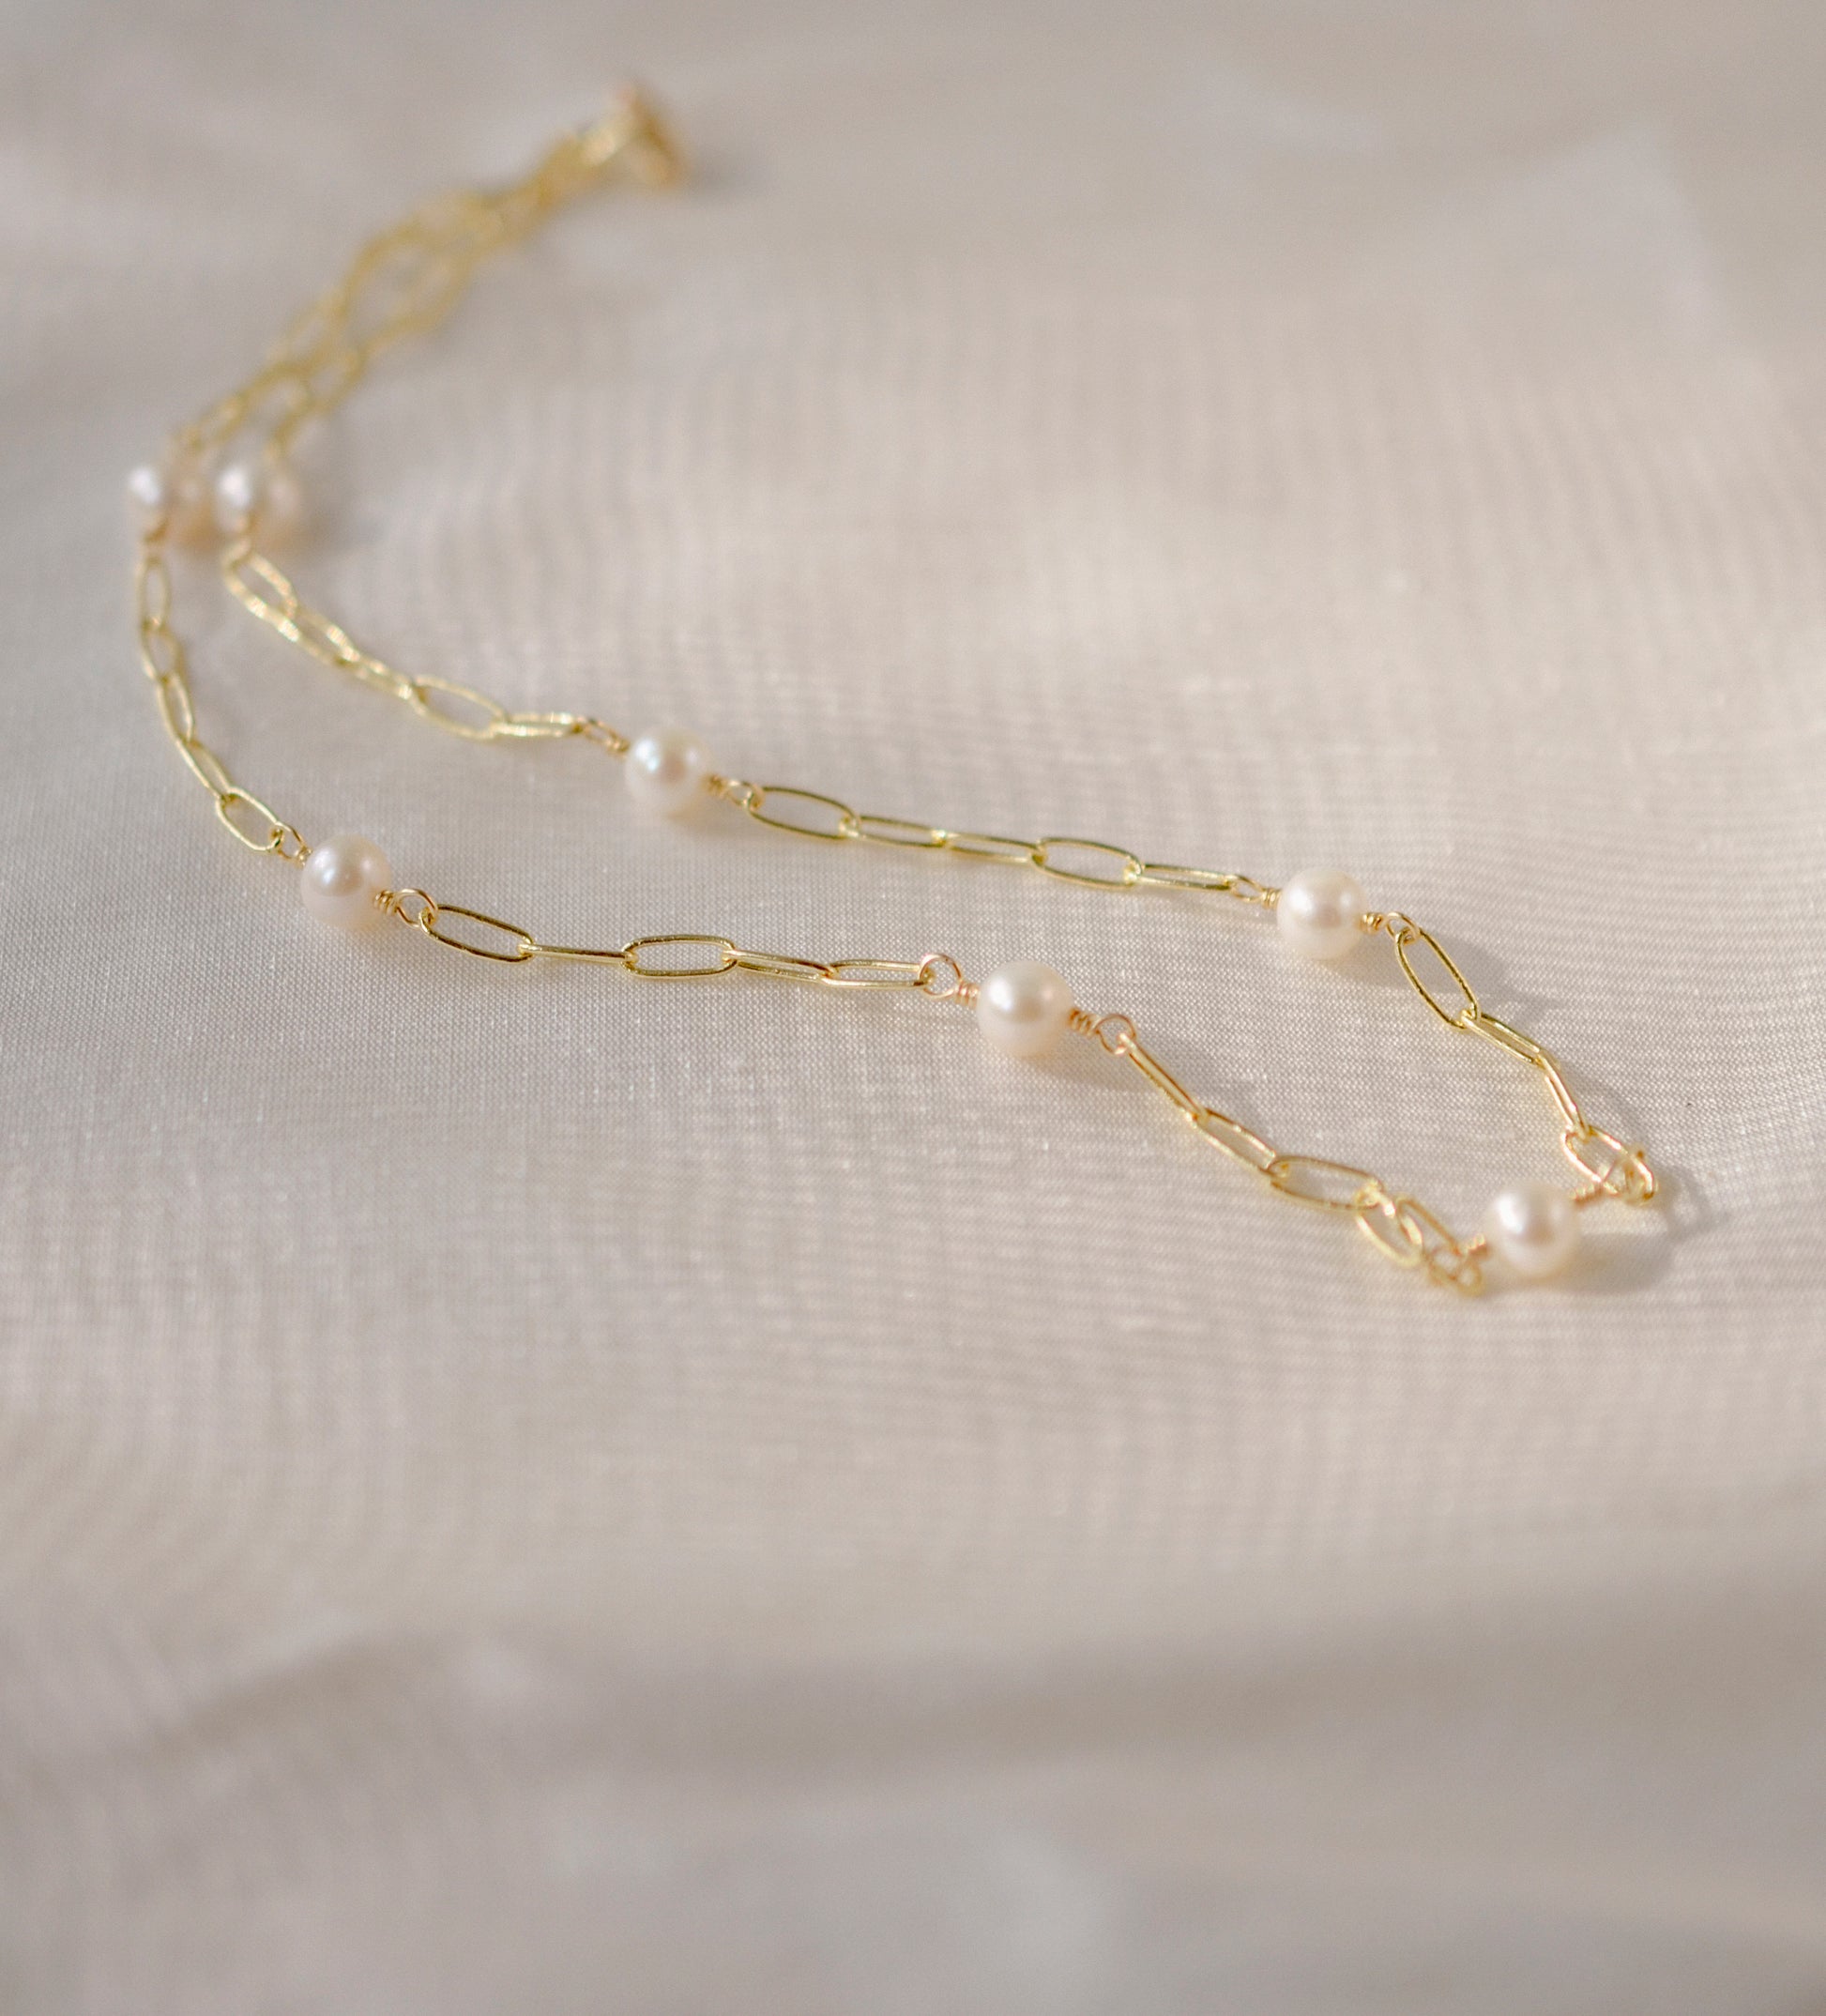 White freshwater pearls set onto a gold paperclip style chain. 